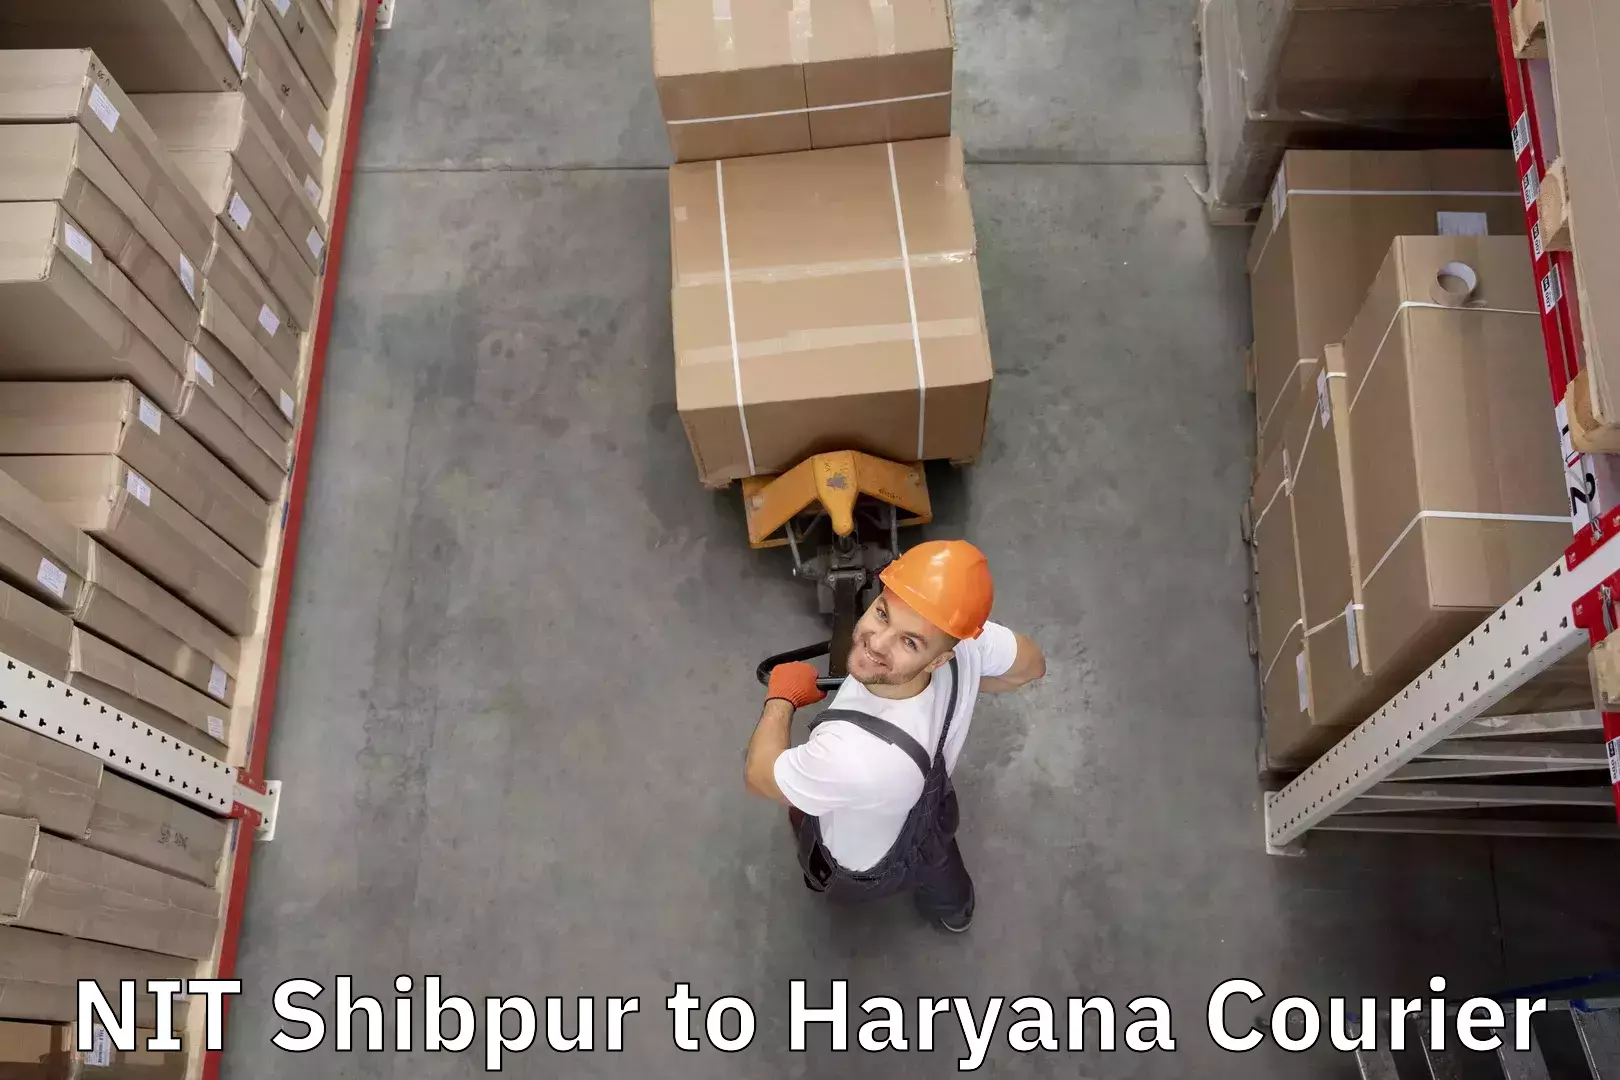 Reliable luggage courier NIT Shibpur to Gurgaon